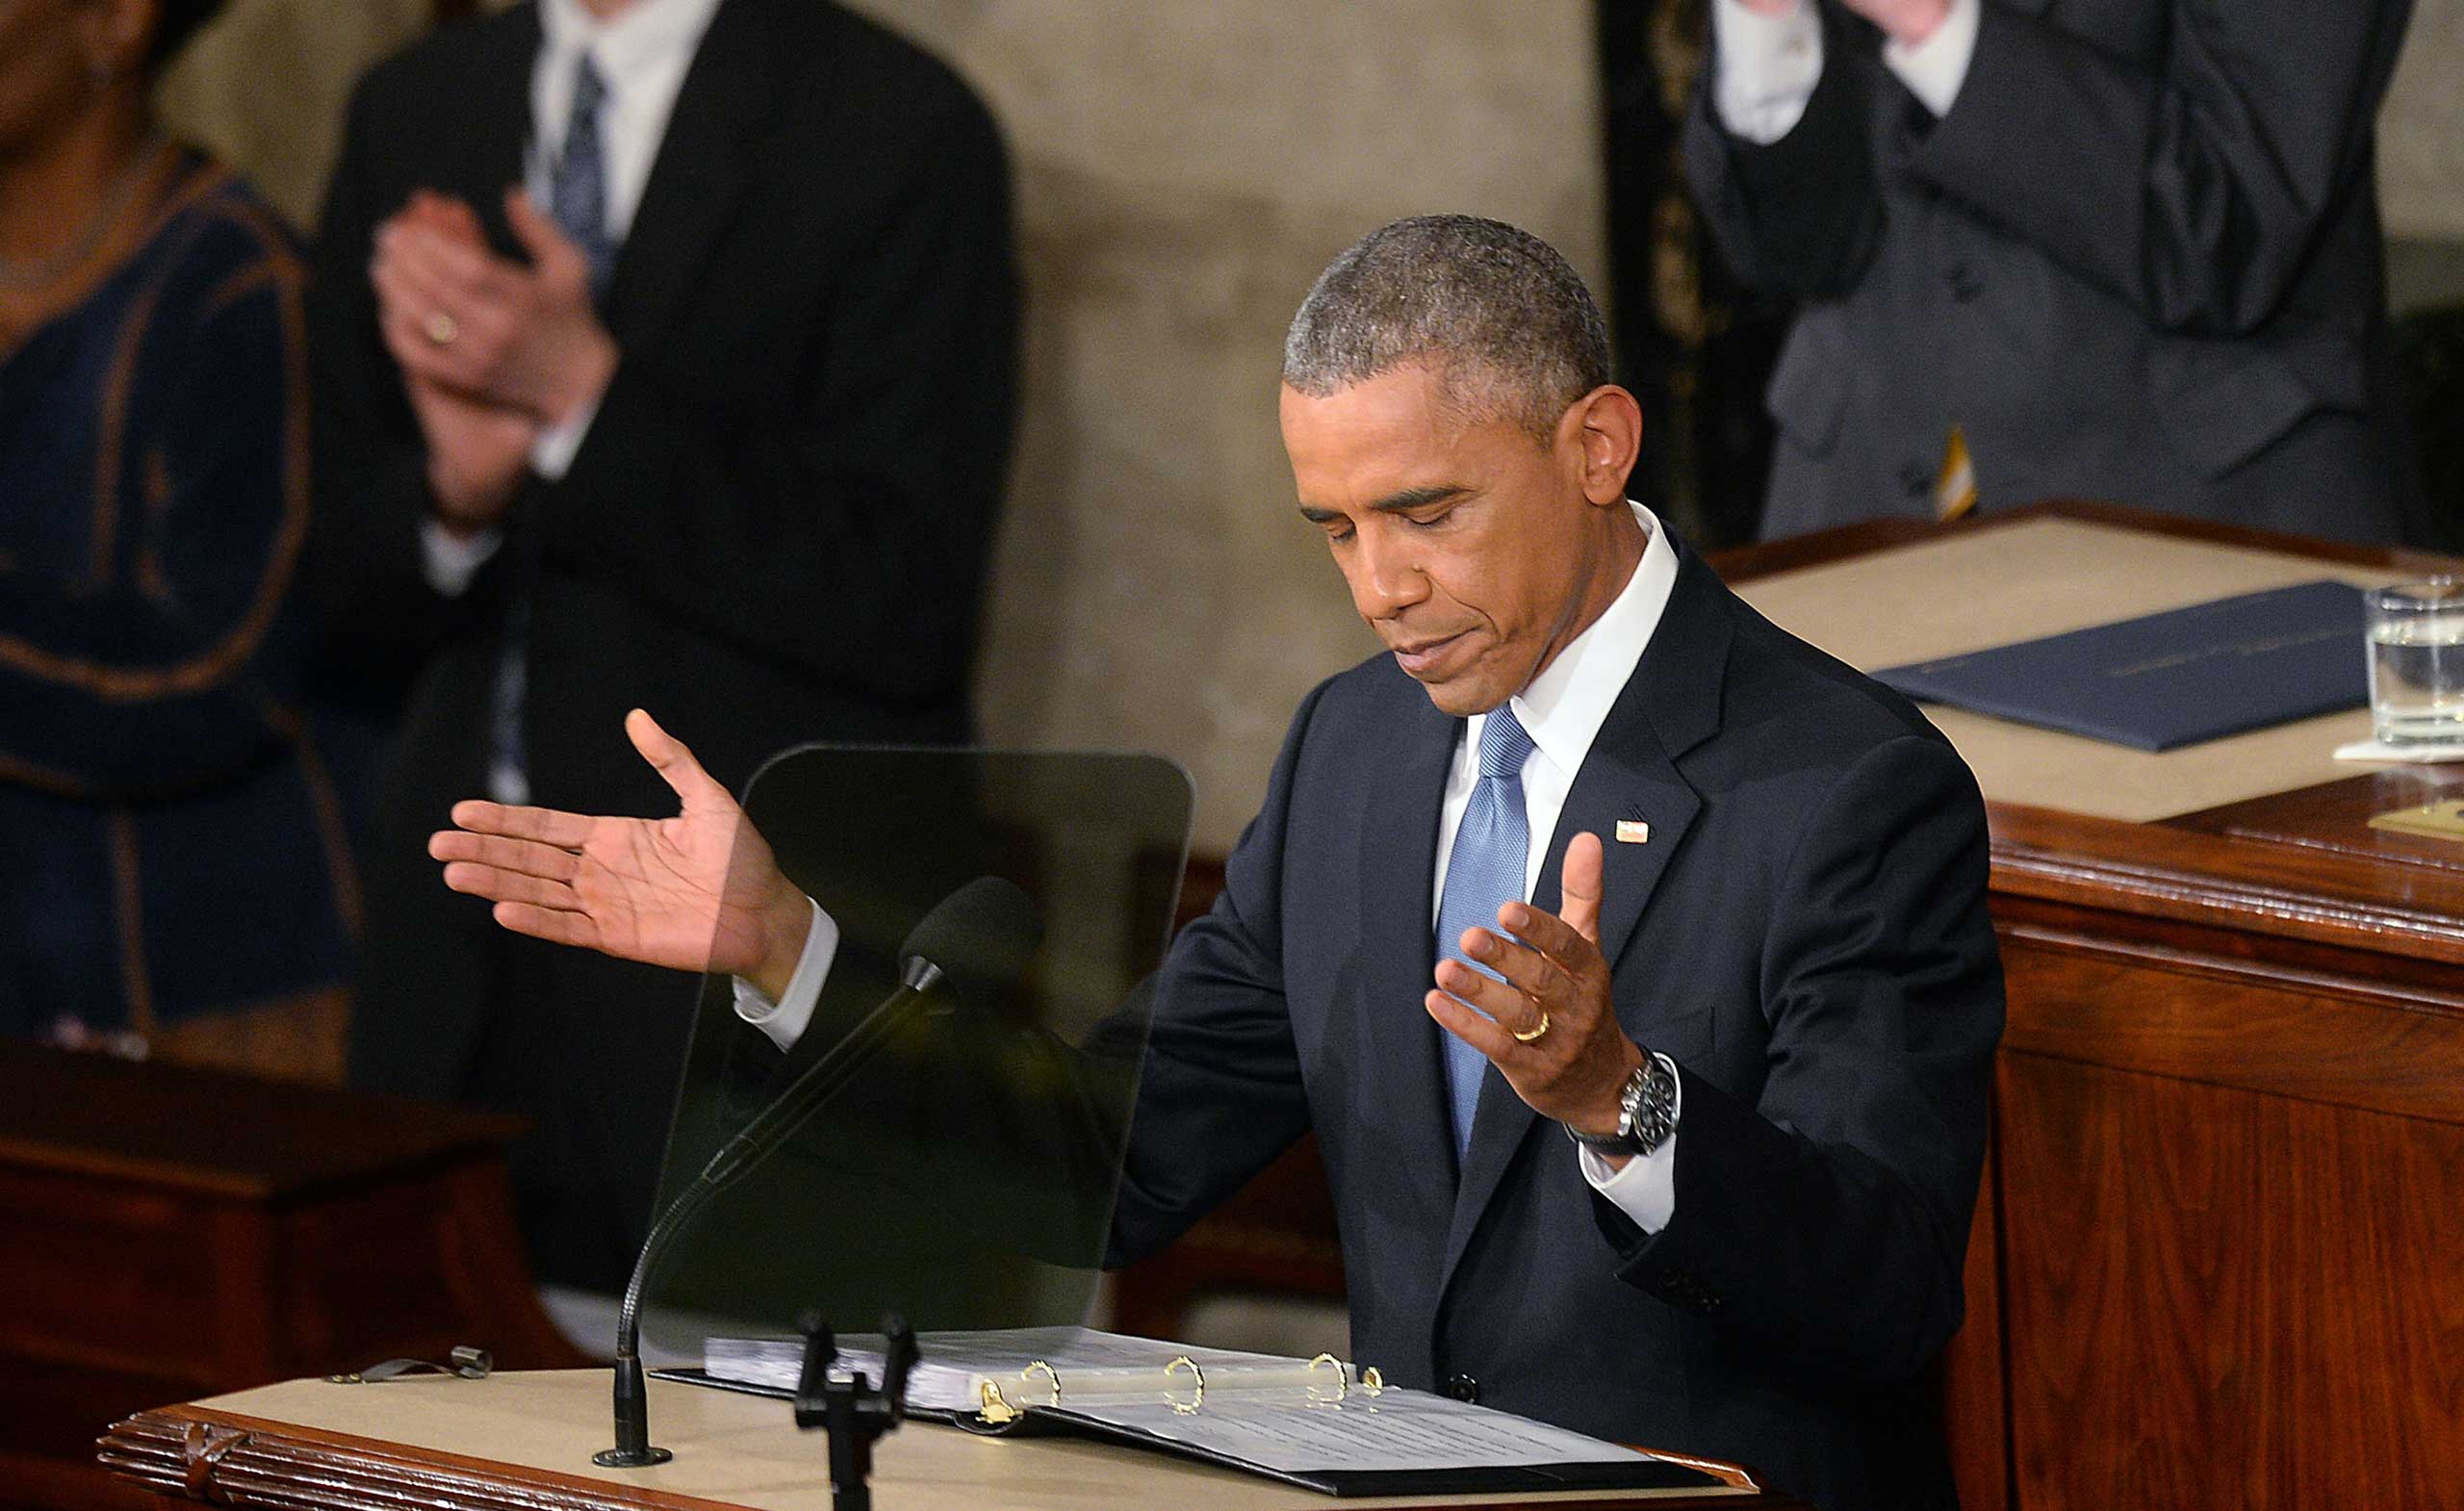 US President Barack Obama delivers his sixth State Of The Union address to the nation at the US Capitol in Washington, Jan. 20, 2015. (Olivier Douliery—SIPA)